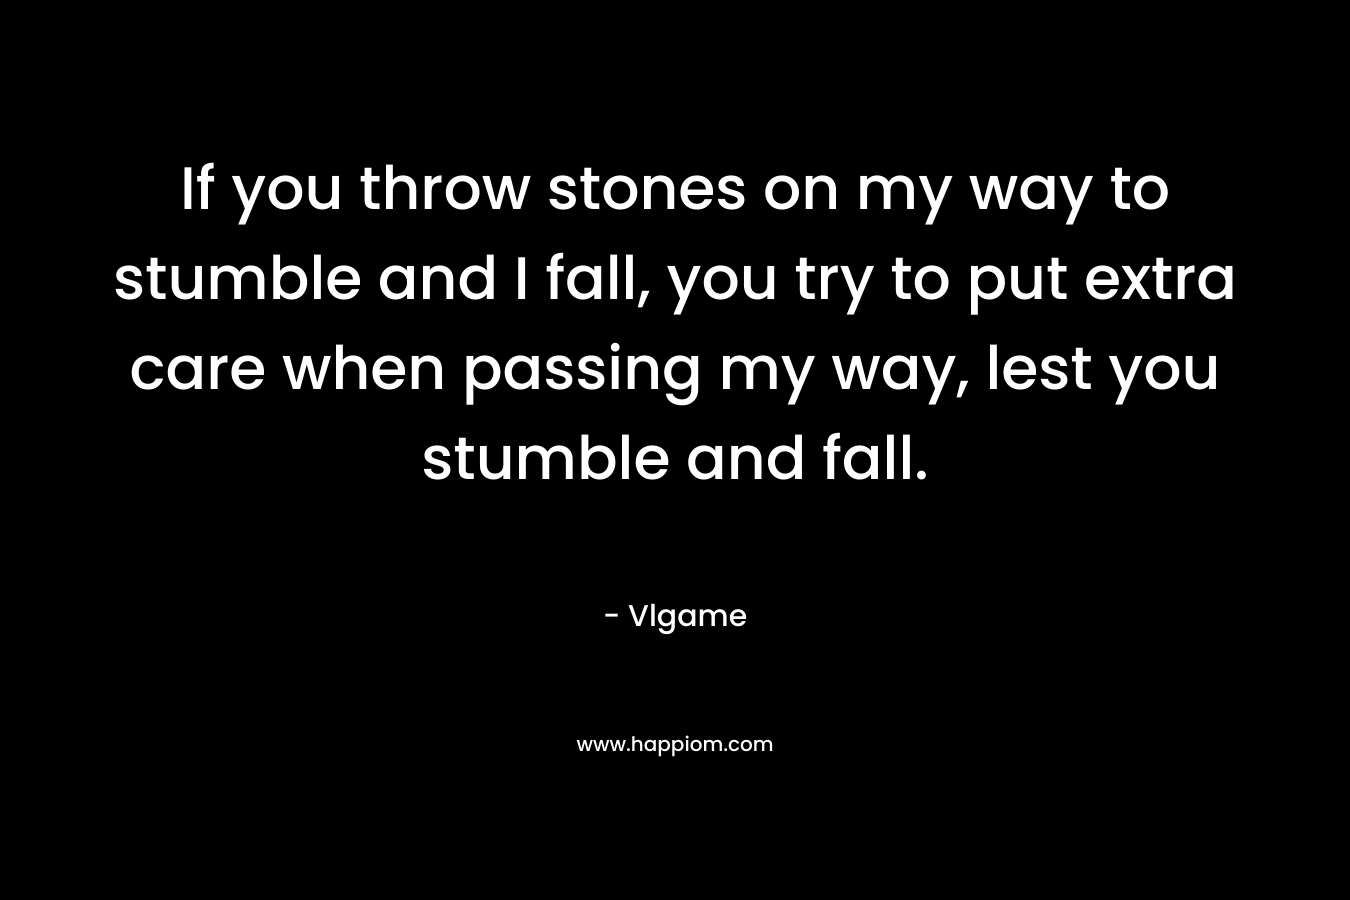 If you throw stones on my way to stumble and I fall, you try to put extra care when passing my way, lest you stumble and fall.